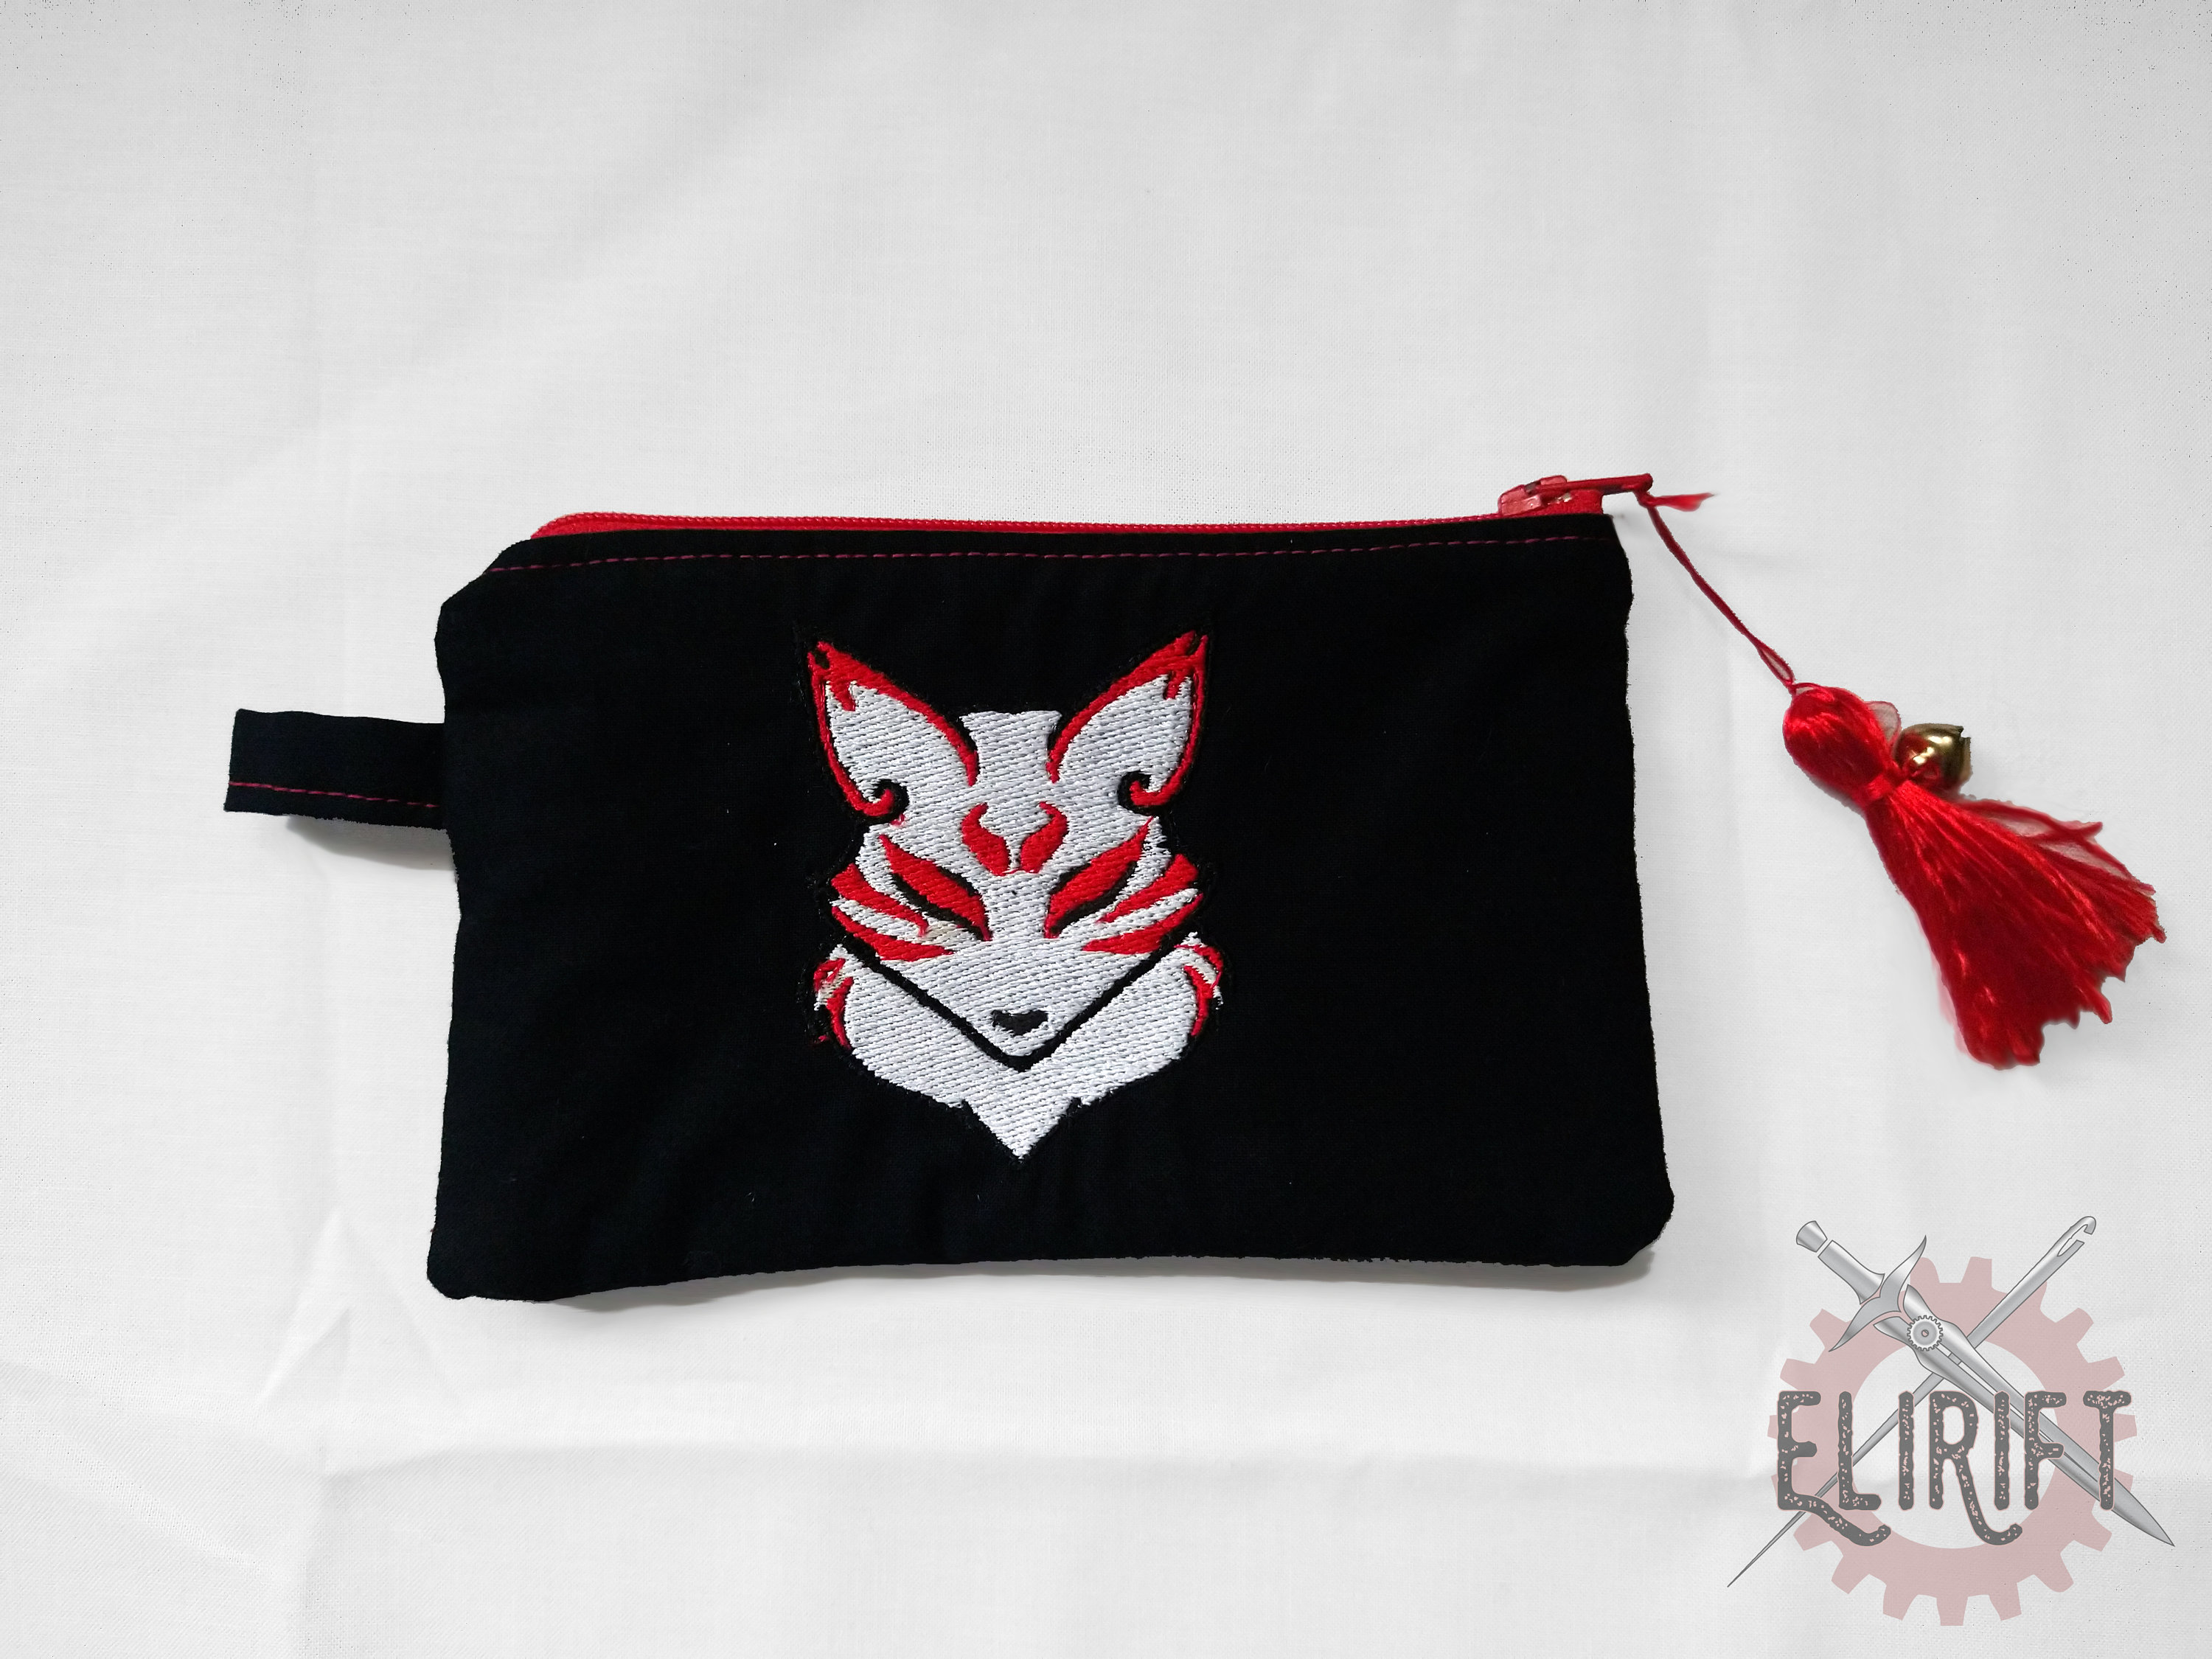 Handmade Embroidered Kitsune Fox Head Wallet Coin Pouch - Etsy